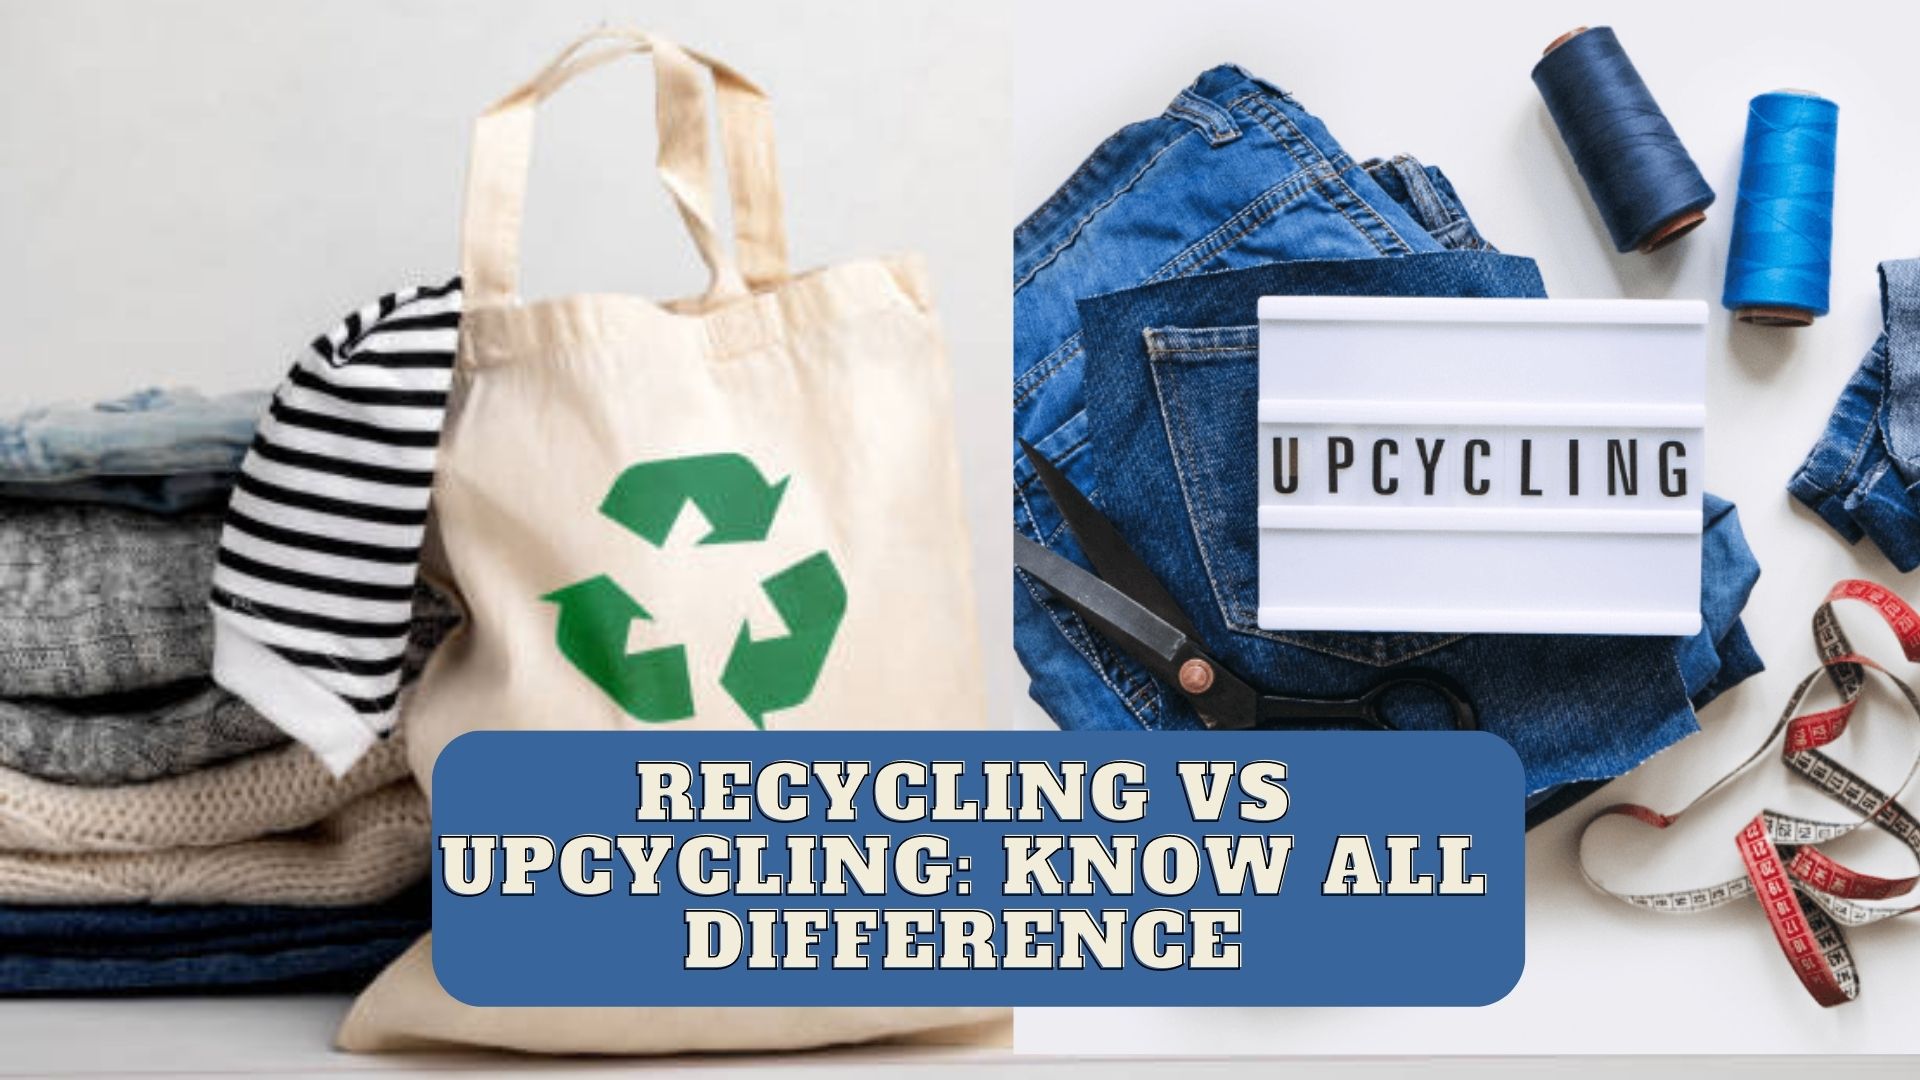 Recycling vs Upcycling Know All Difference